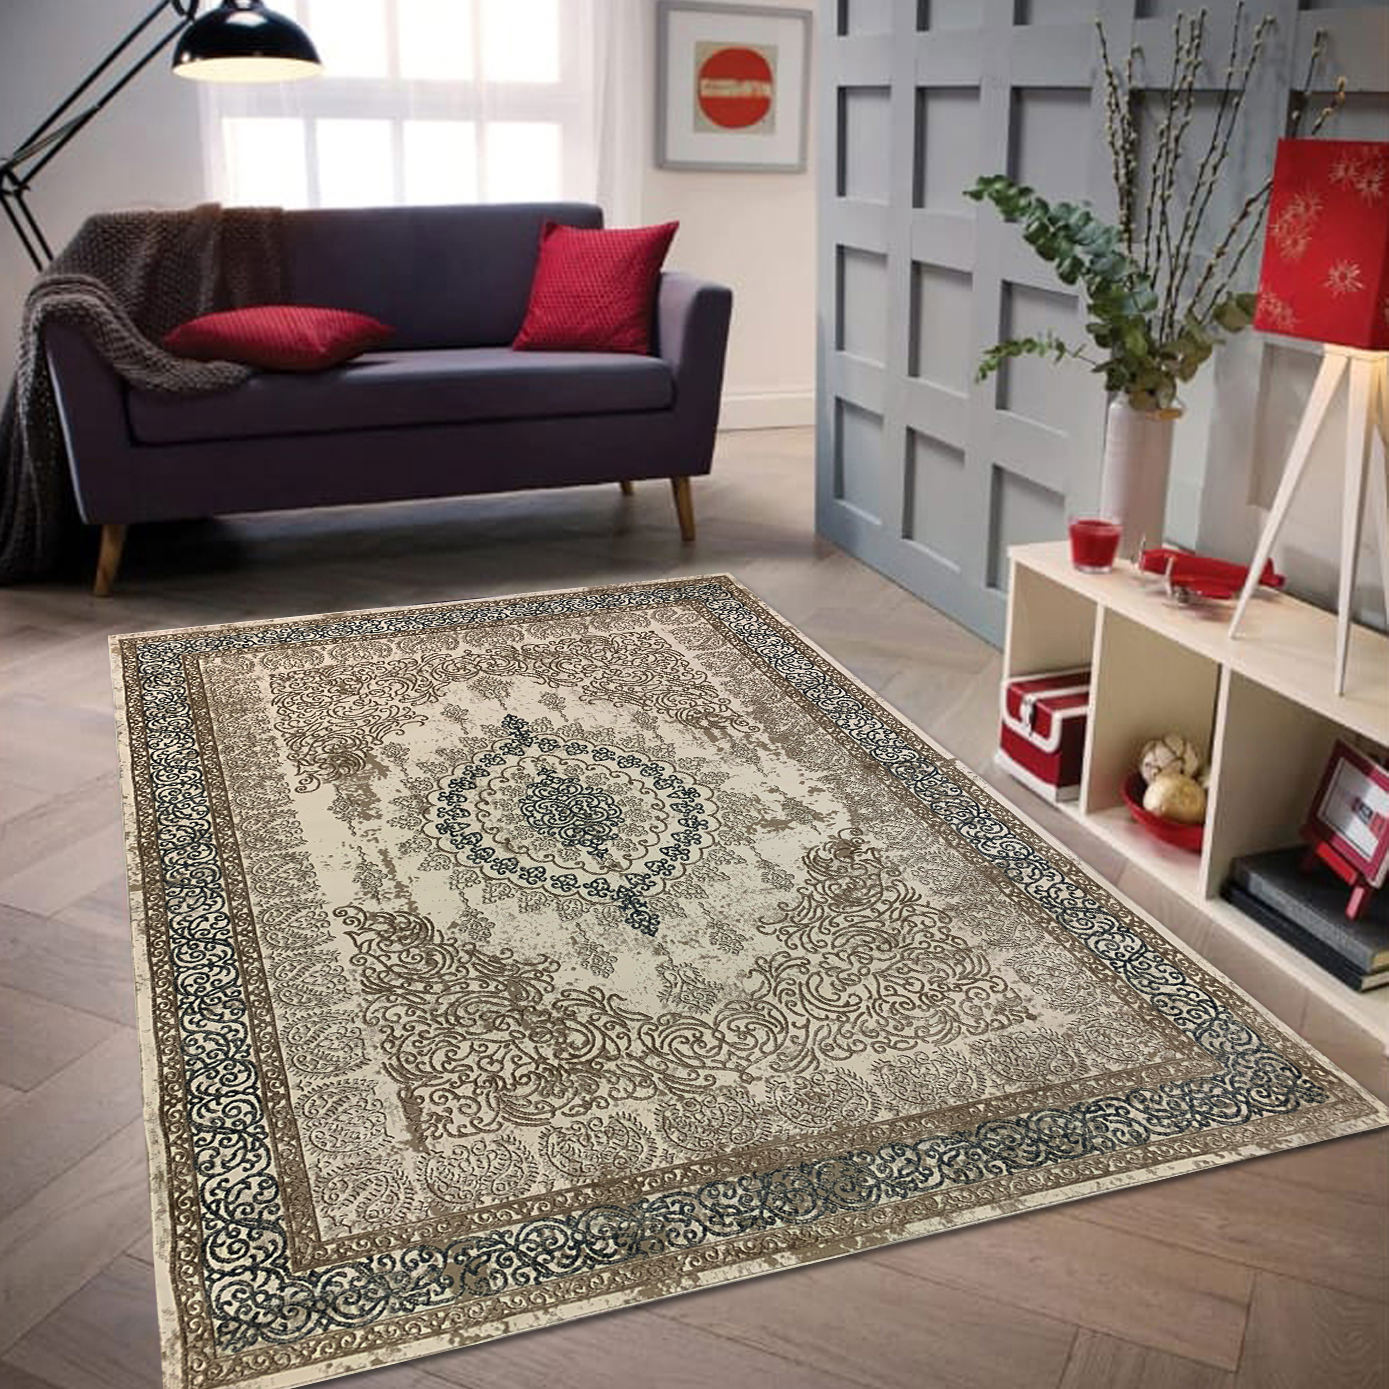 a rug in a room